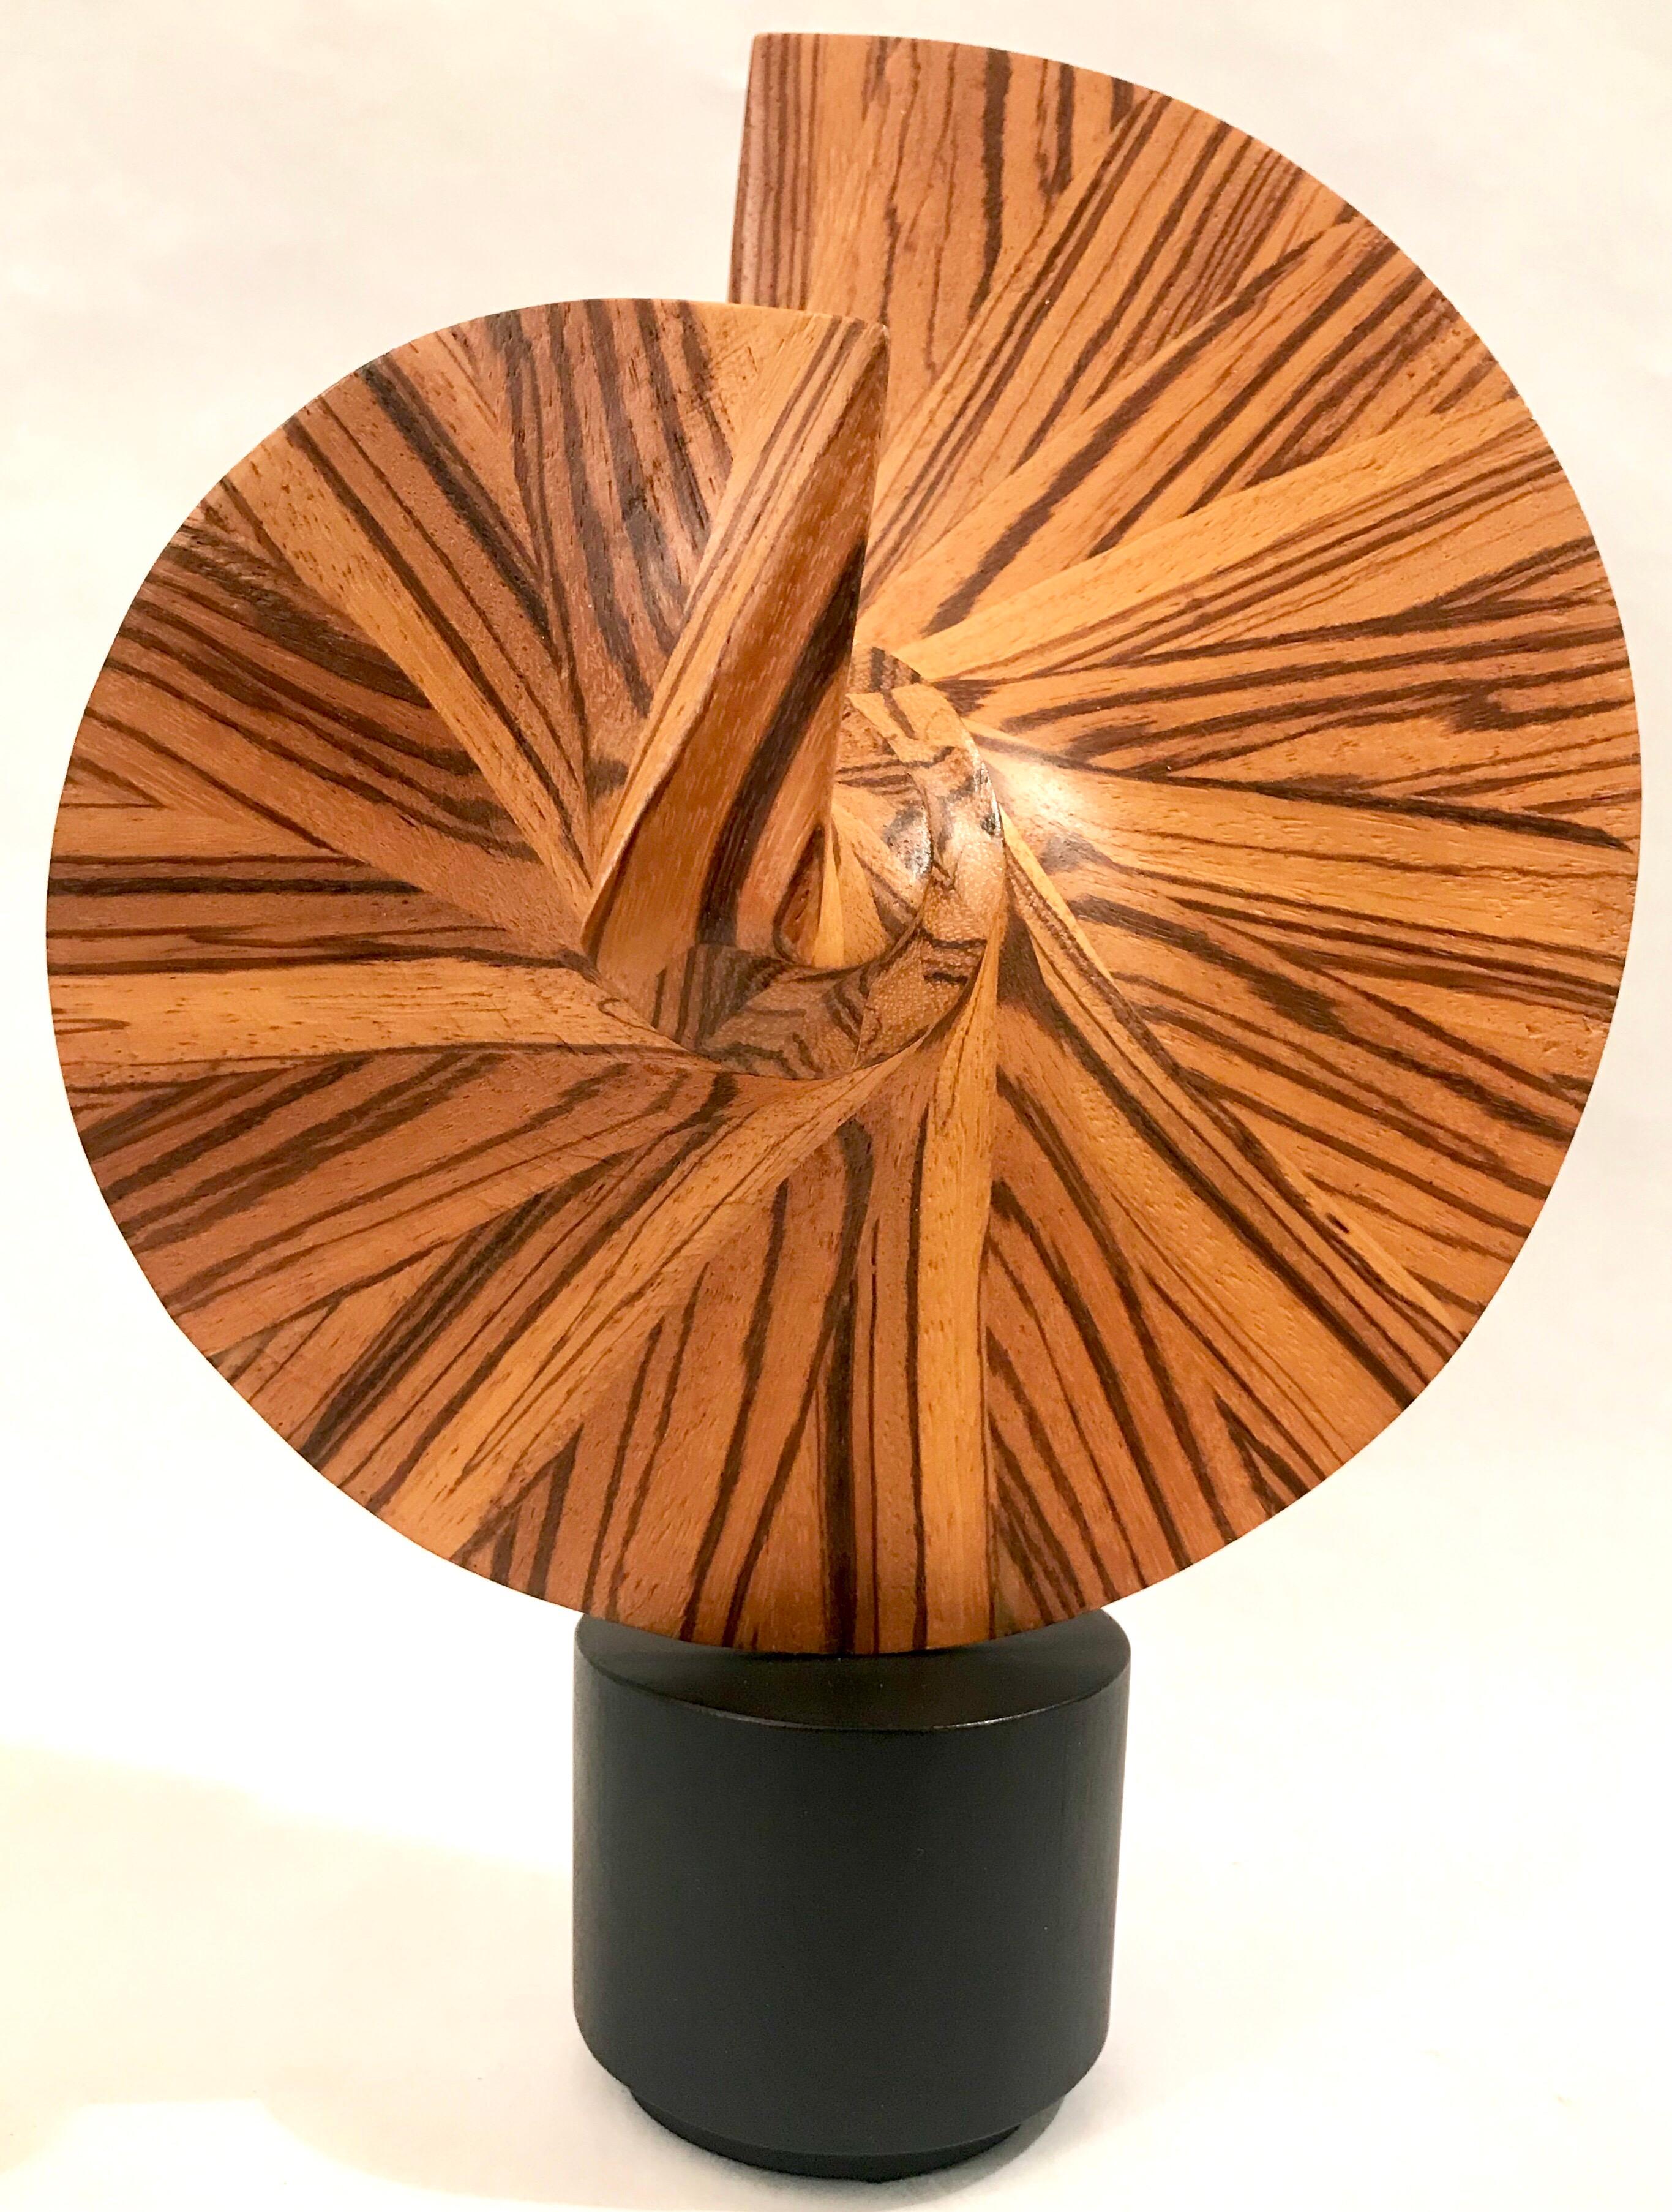 Wood sculpture signed J B Veiner and dated 1989.